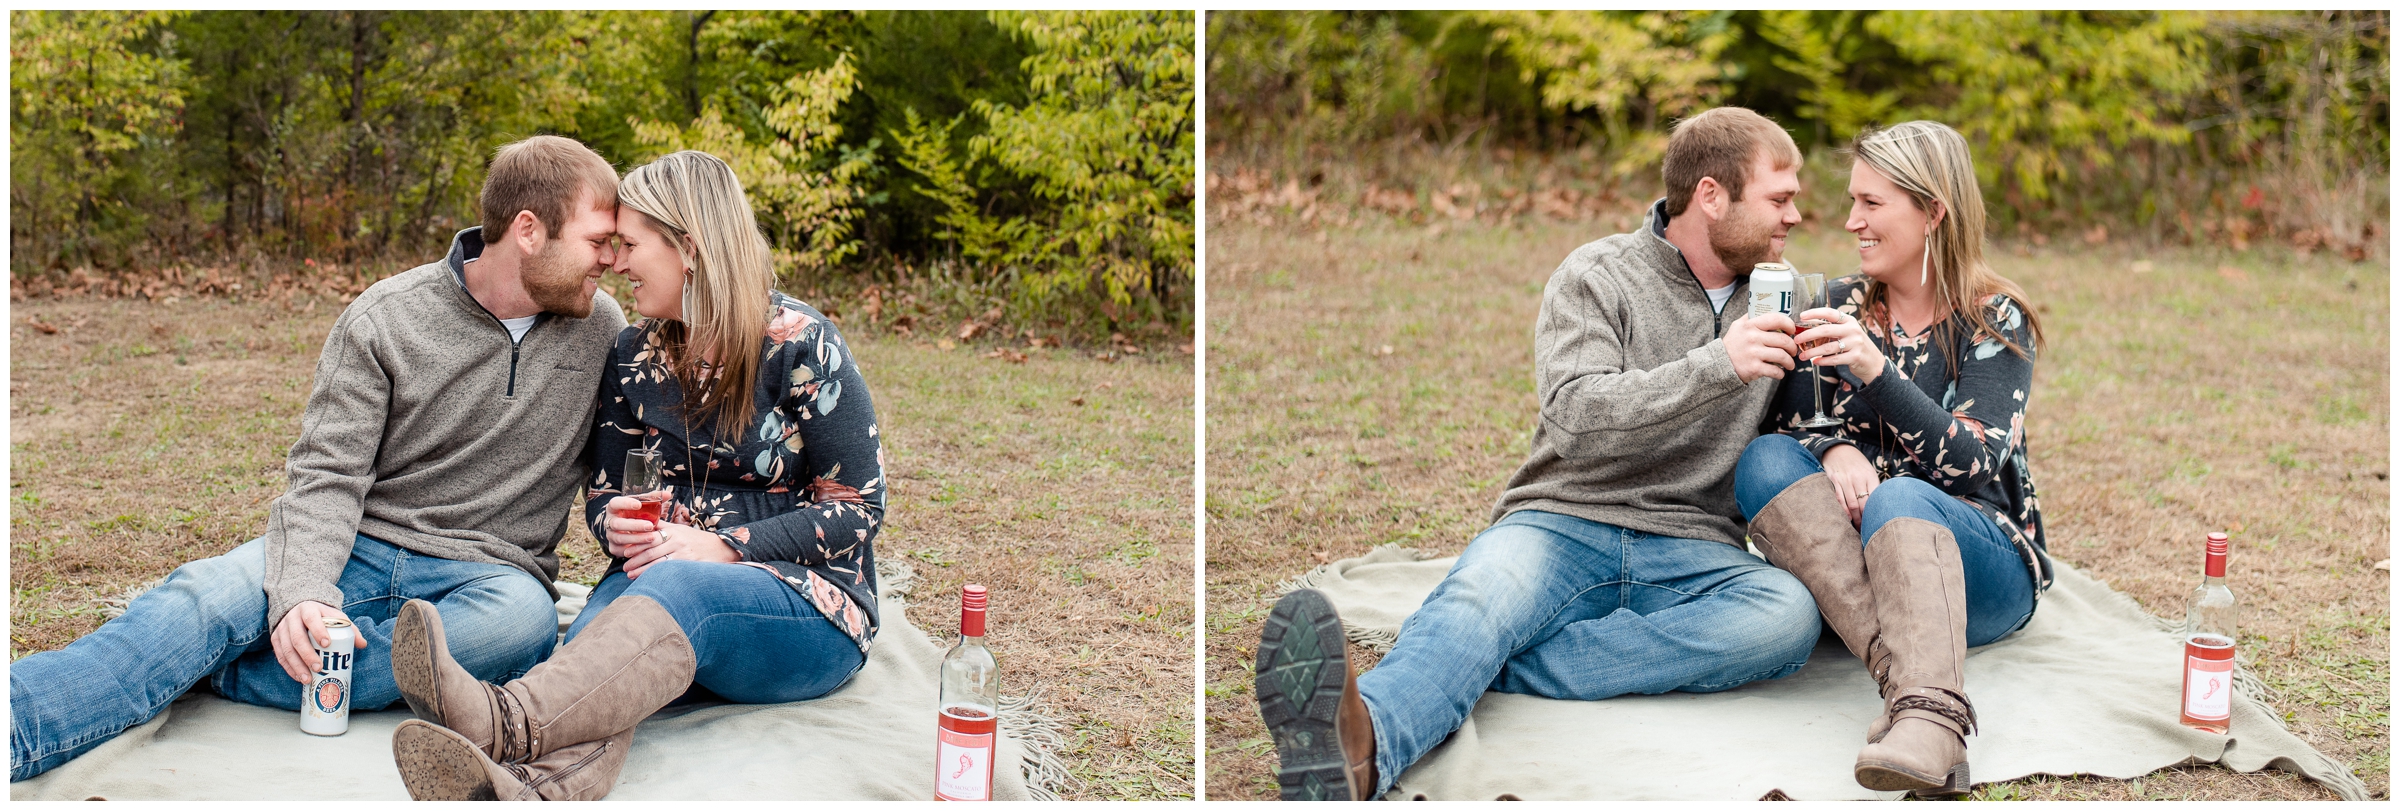 Beer and wine engagement photos